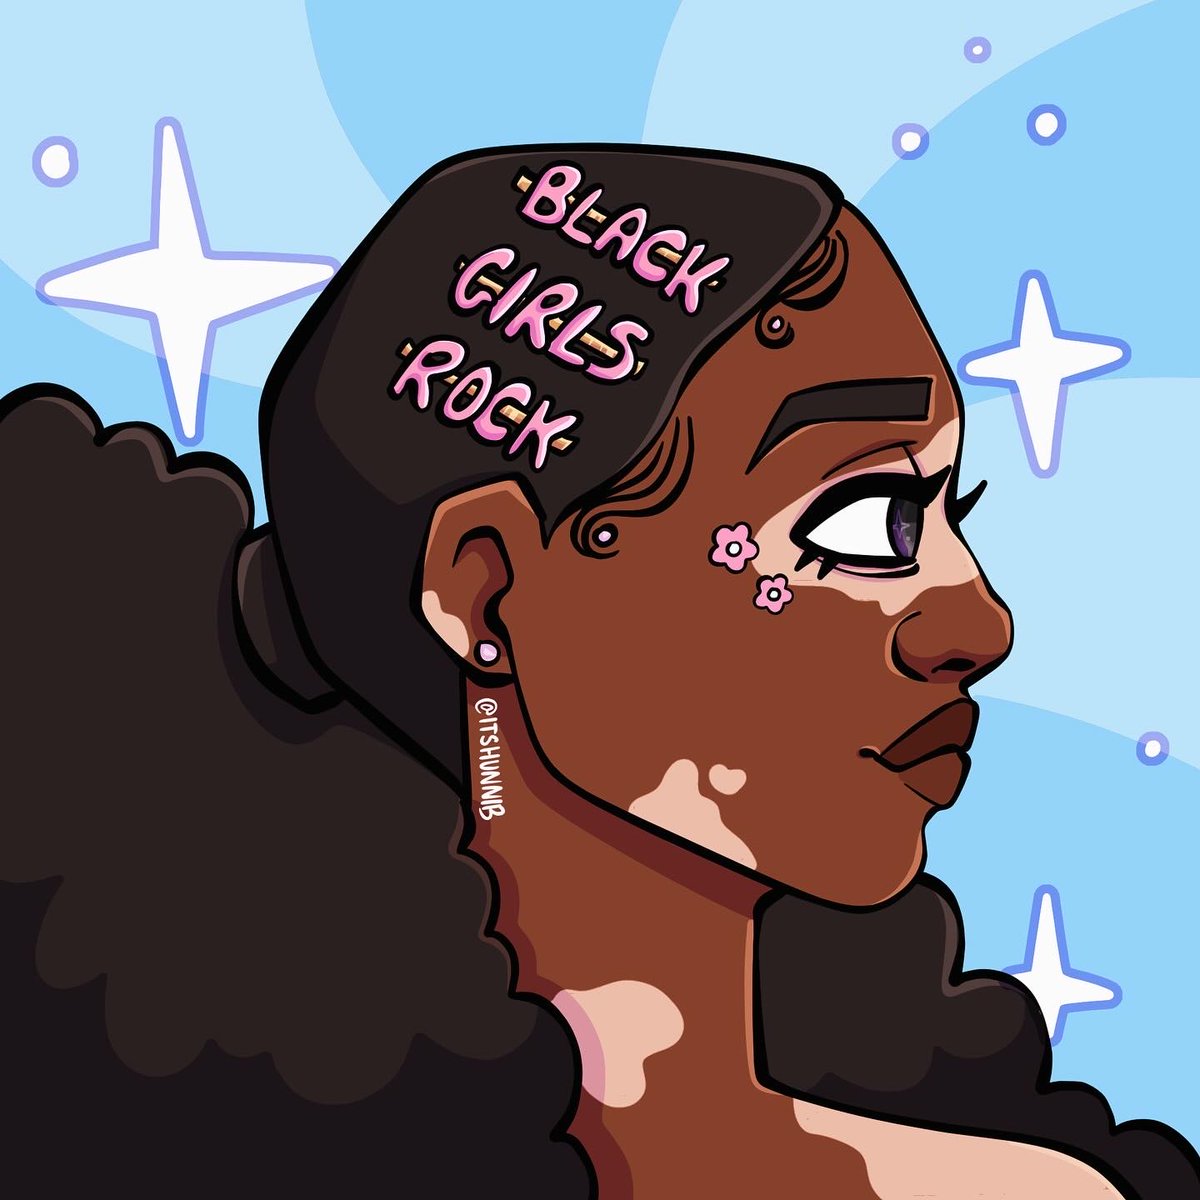 Black Girls Rock illustration set, Should I do a set of guys for this as well or move on to next illustration idea 🖤✨

This was fun to do, wanted to do more but maybe next time! 

#blackgirlsrock #Blackhistorymonth #NaturalHairArt #editorialart